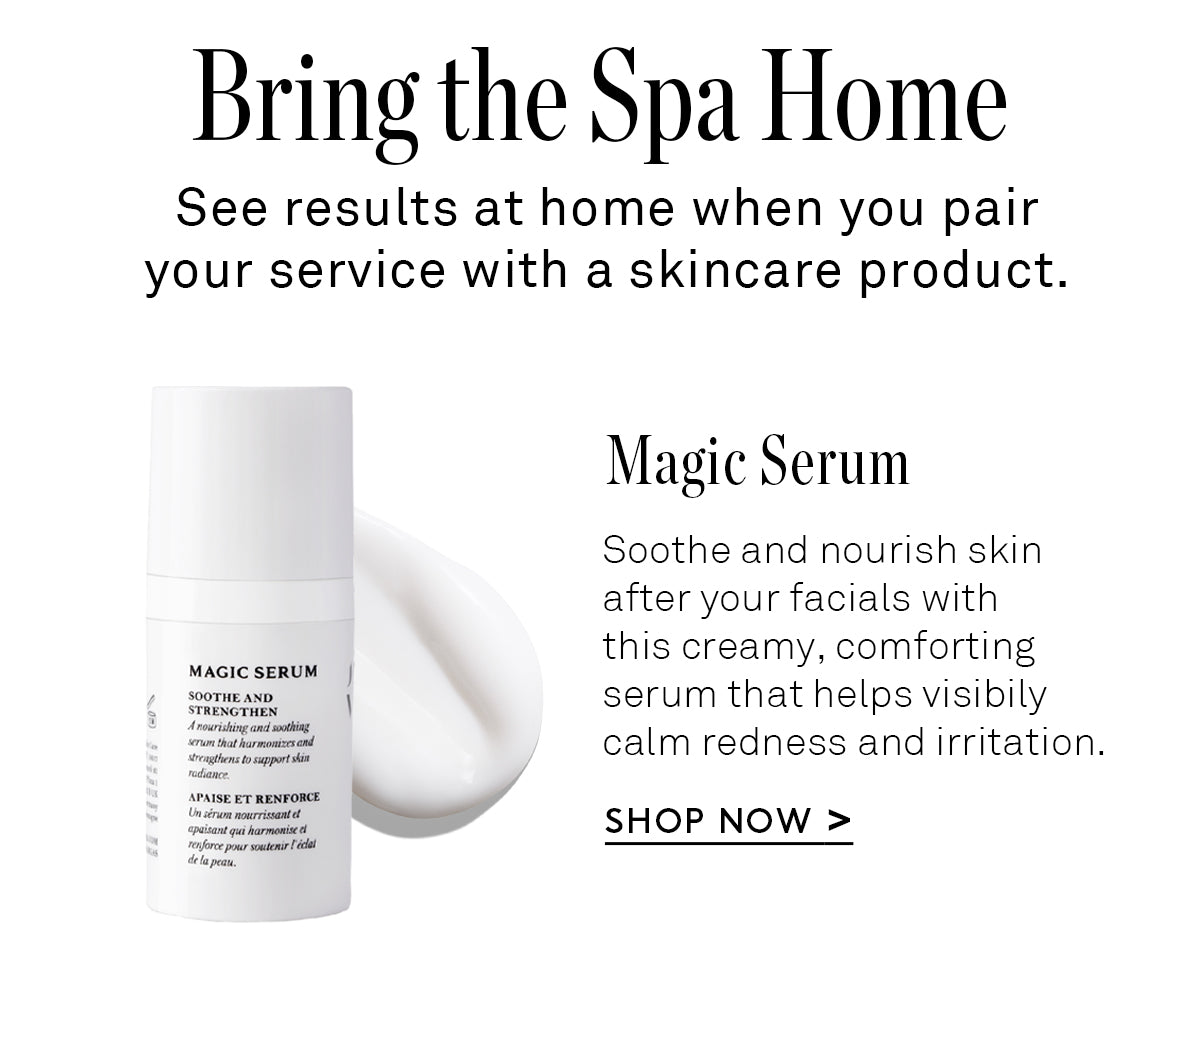 If You Want Calm, Soothe Skin, Try The Joanna Vargas Magic Serum